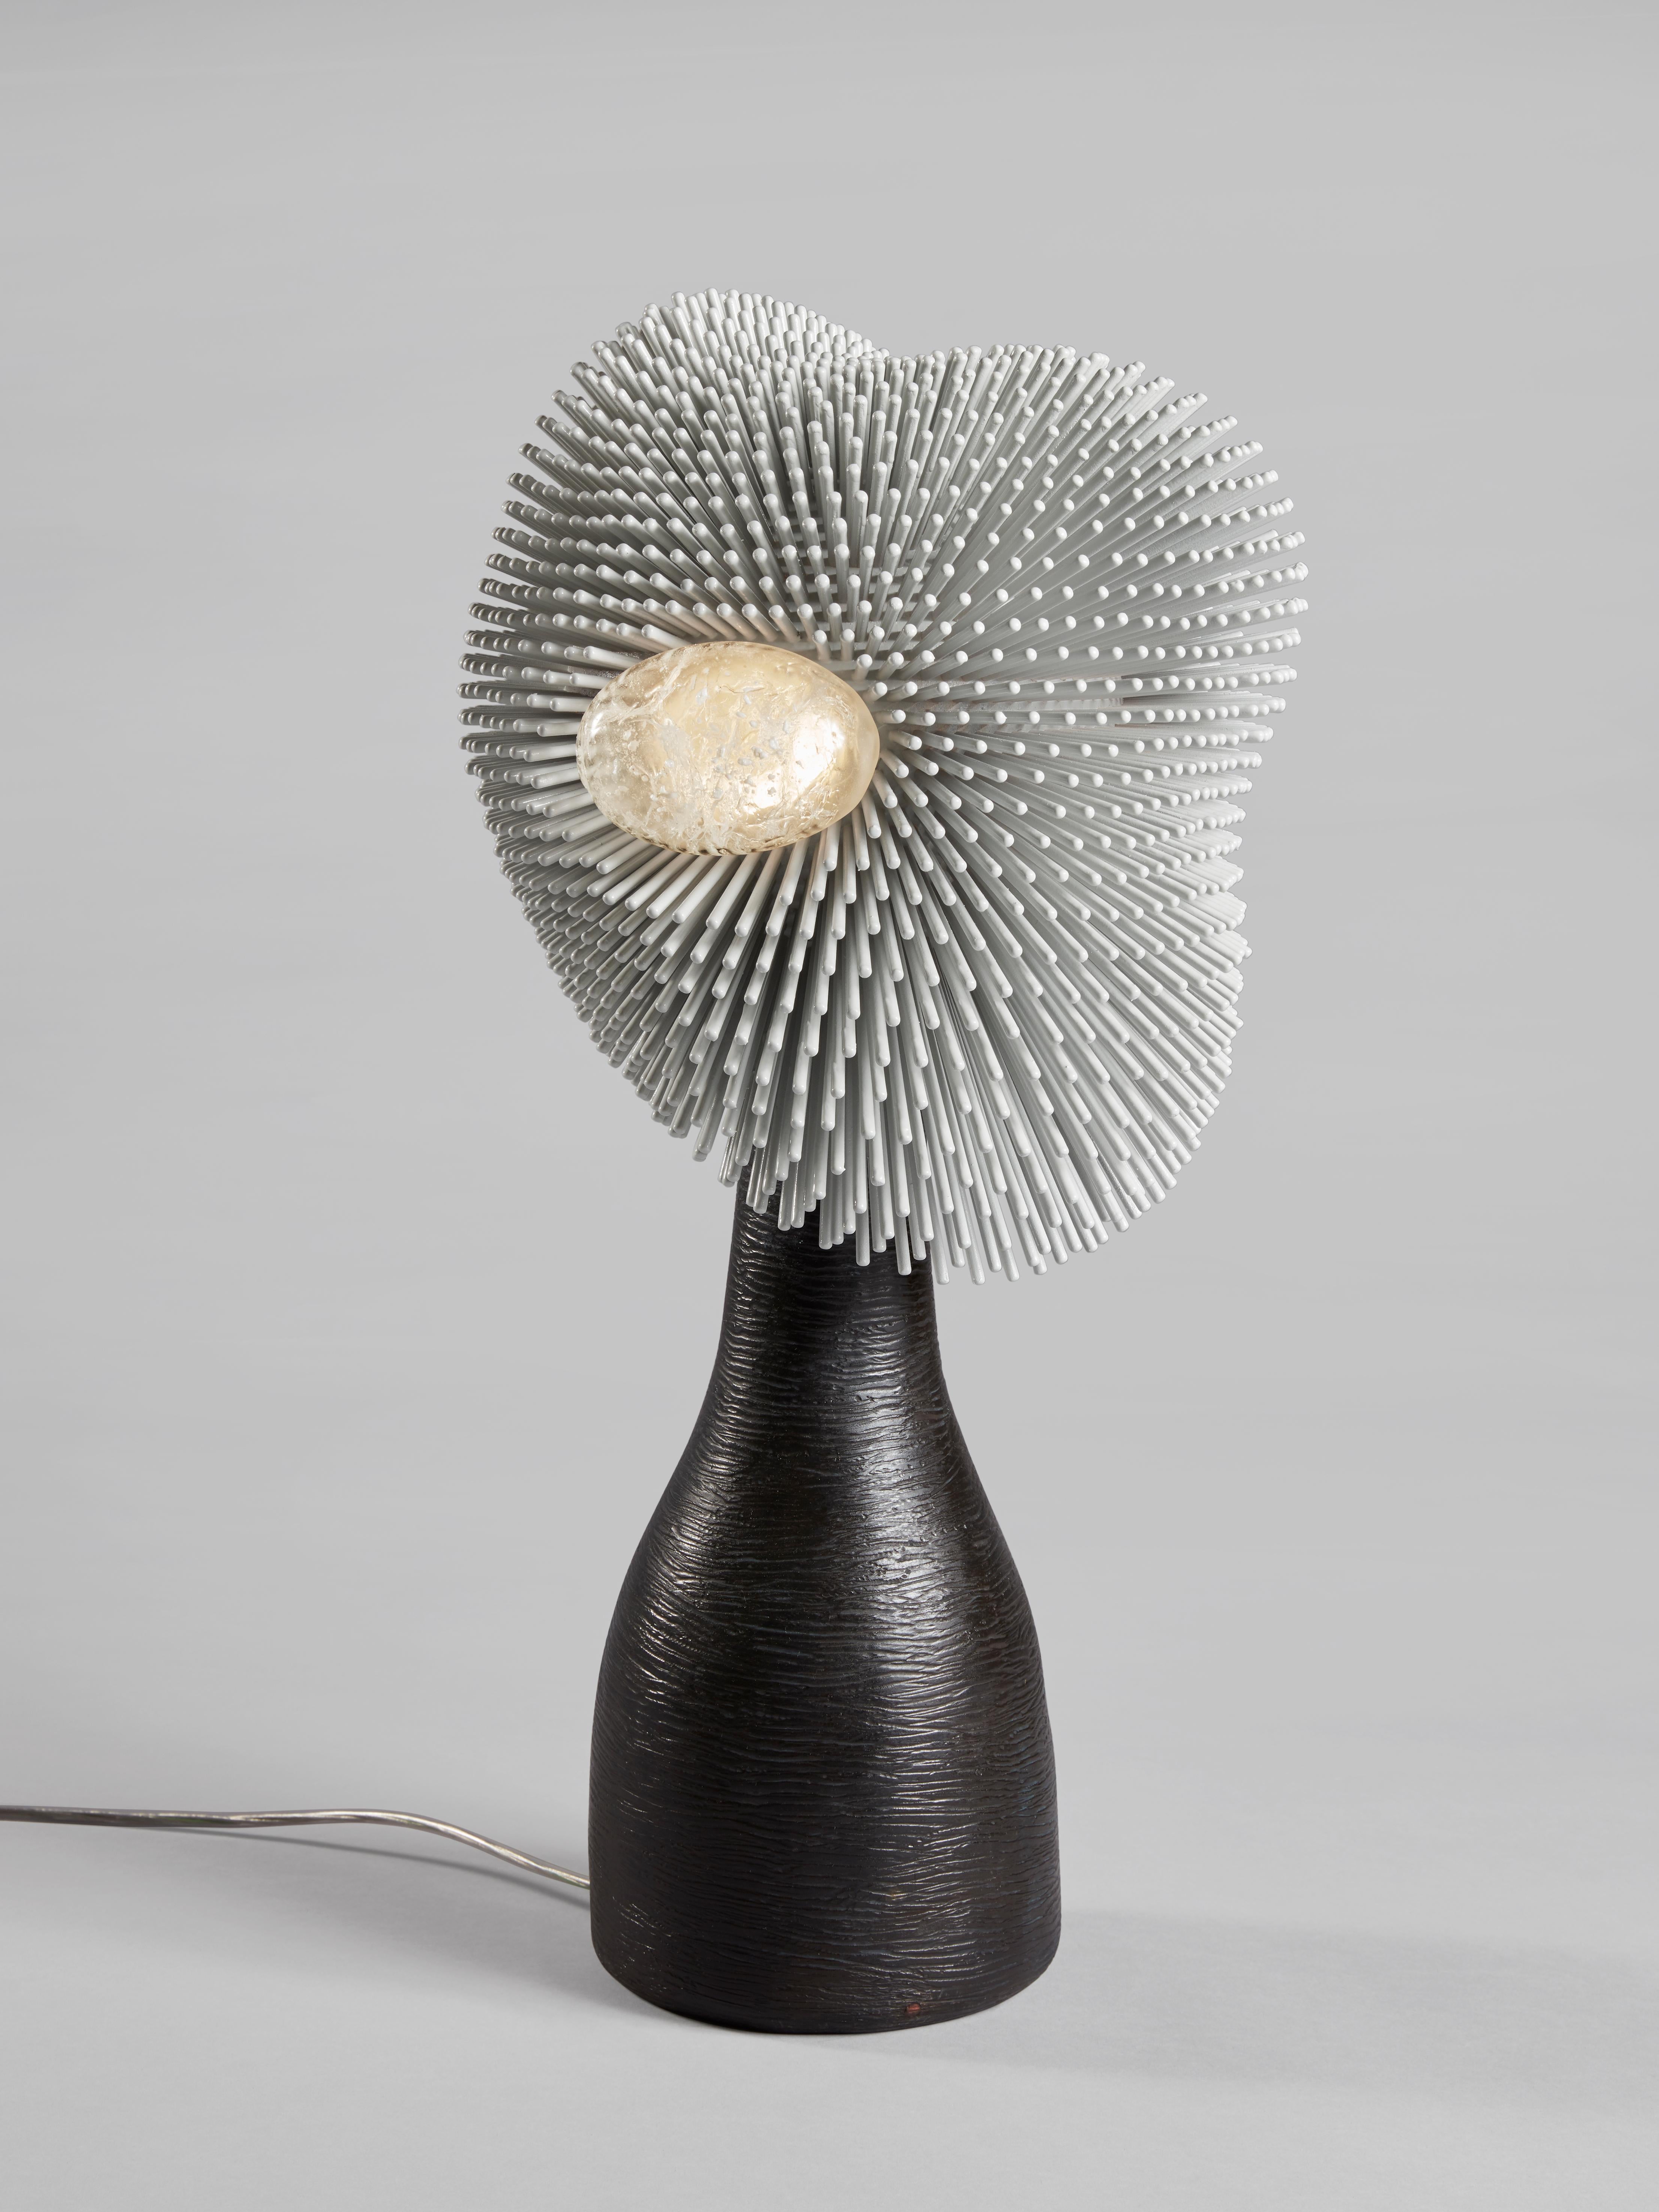 From simple beechwood rods, German artist Pia Maria Raeder creates refined functional sculptures reminiscent of biomorphic forms. She has become globally known for her ’Sea Anemone’ collection that reflects the beauty found on the ocean floor. Work